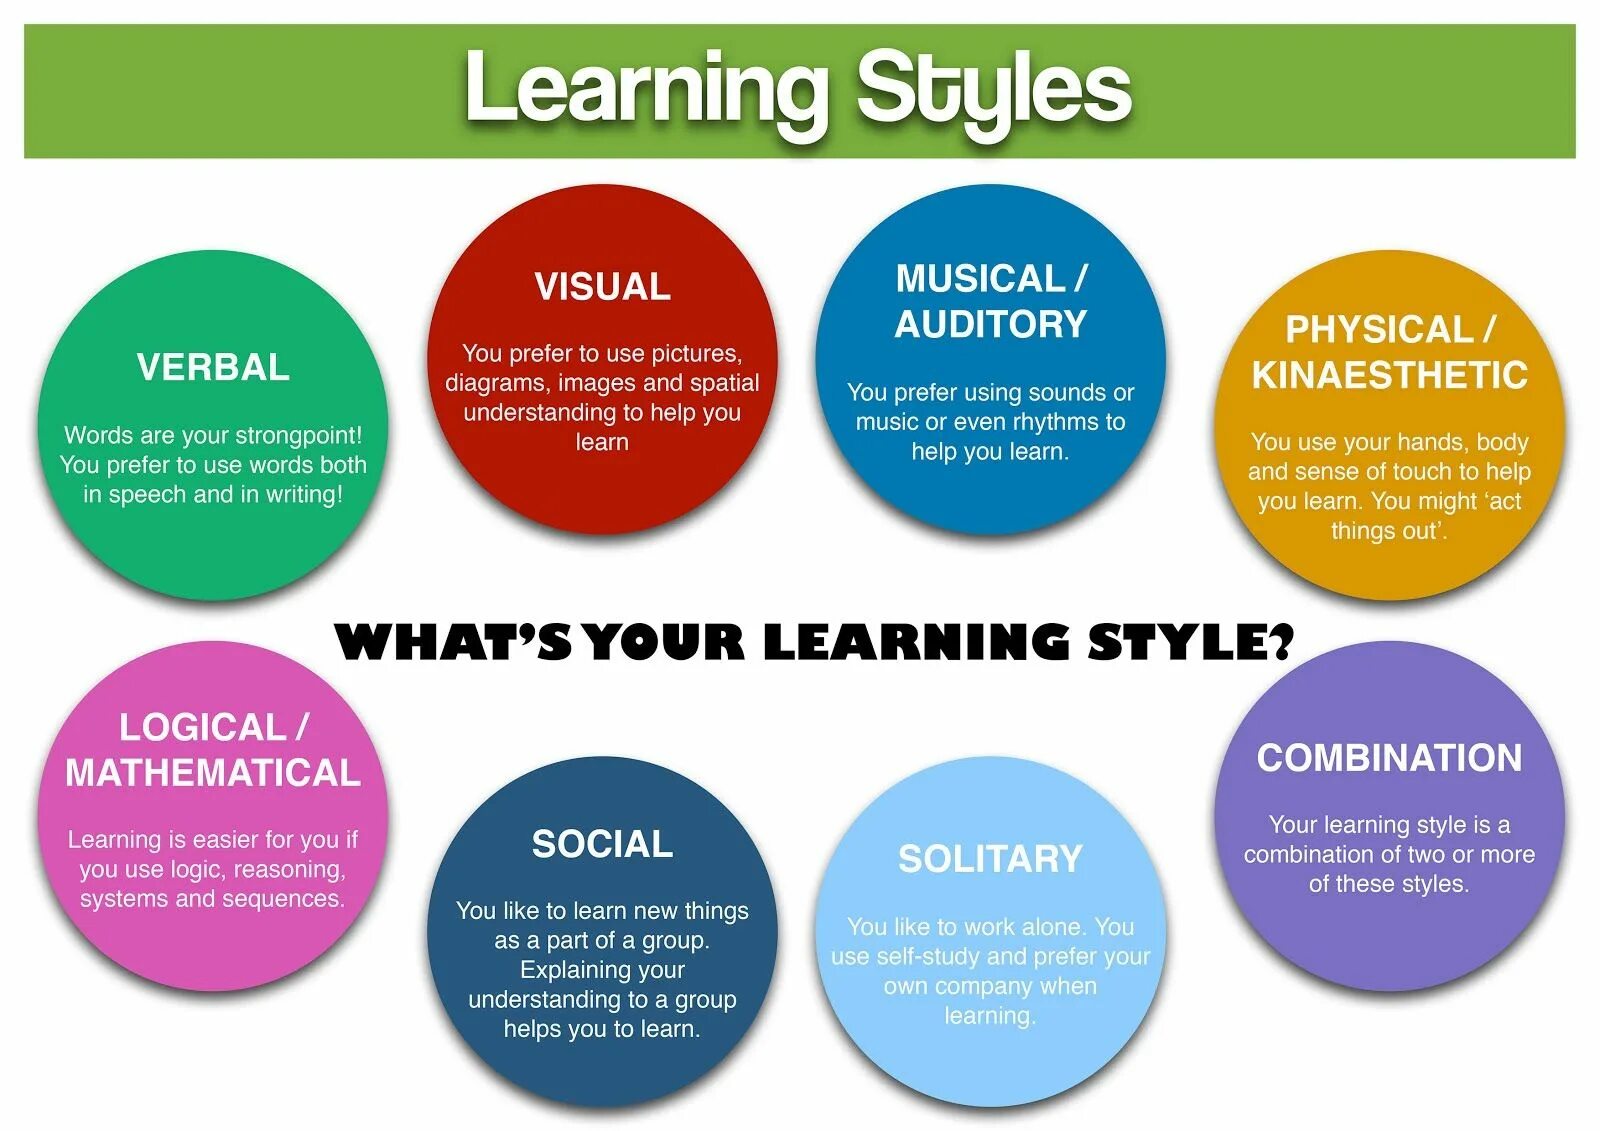 Color is important. Learning Styles. Types of Learning Styles. Different Learning Styles. Learning Styles and Strategies.